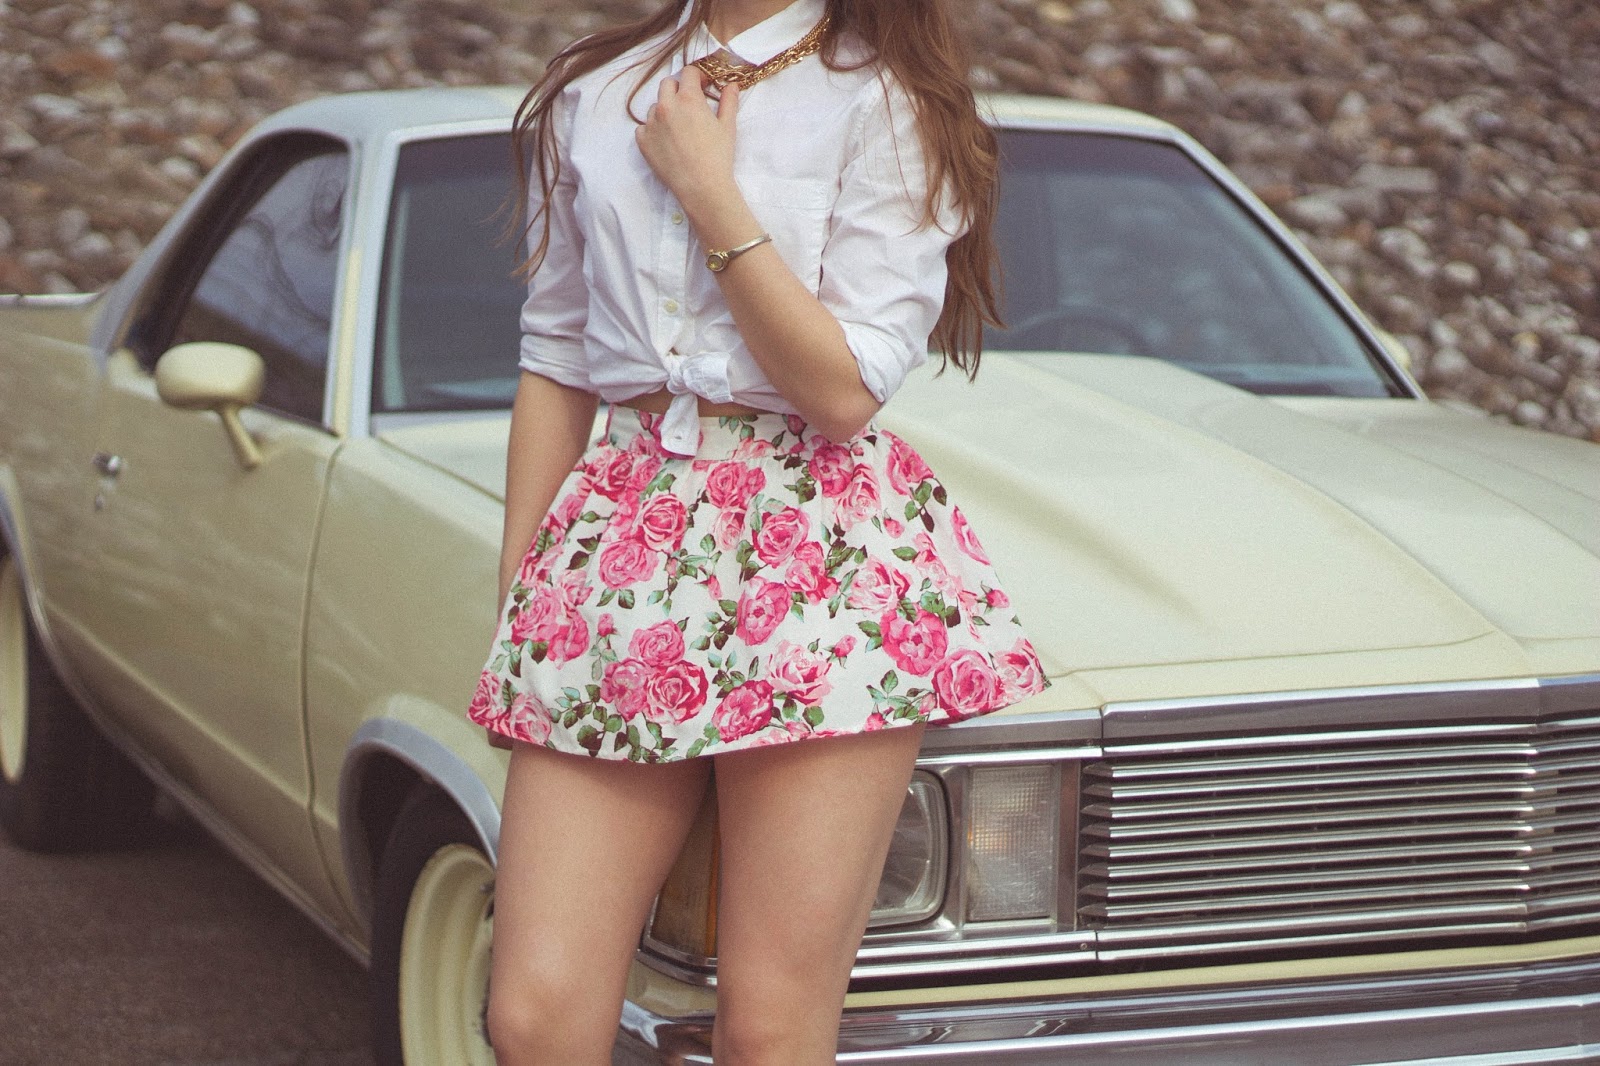 Vintage Inspired Outfit, lana del rey style, retro style, outfit, fashion blogger, feminine, femme fatale,forever 21 floral skort, gap white button up, el camino